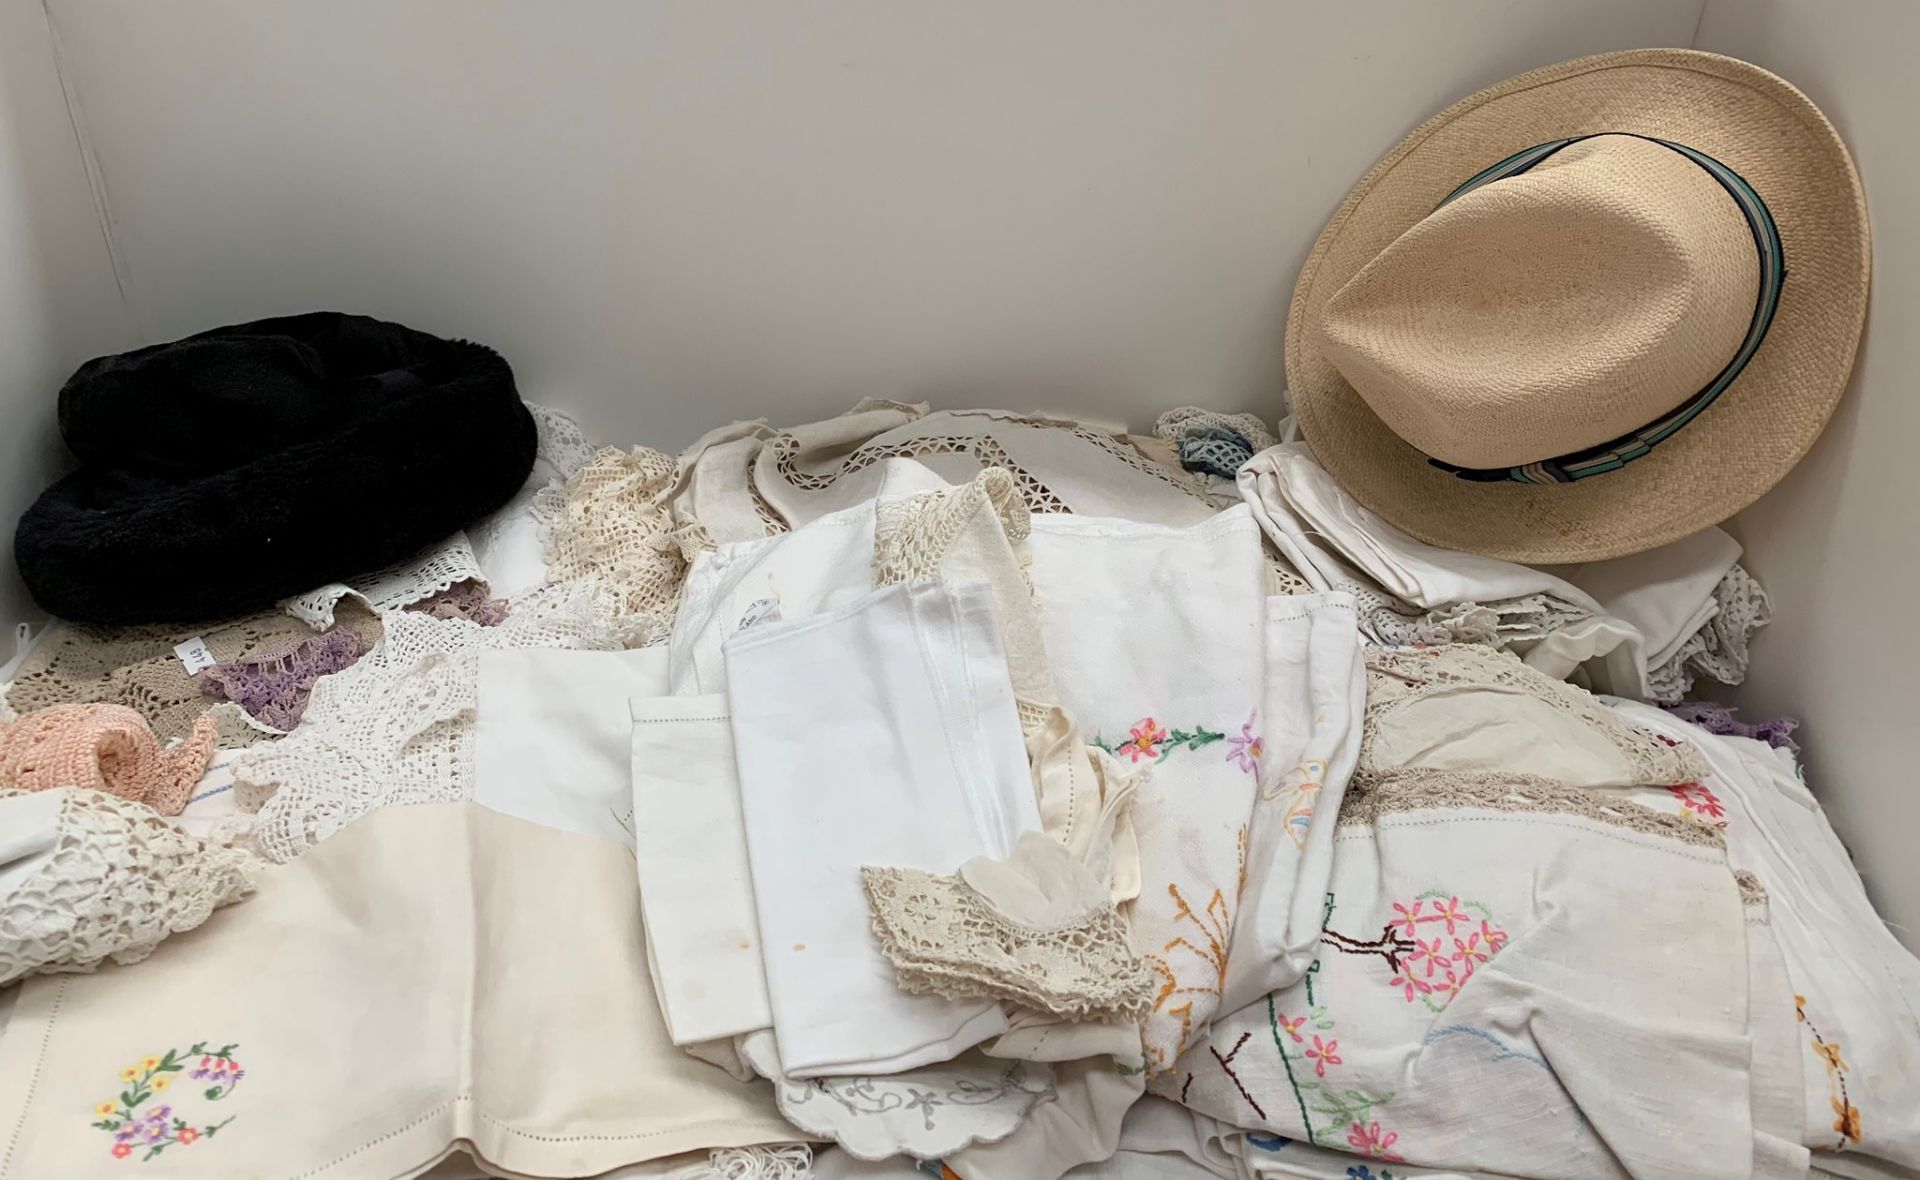 Bag and contents - assorted table linens and two hats